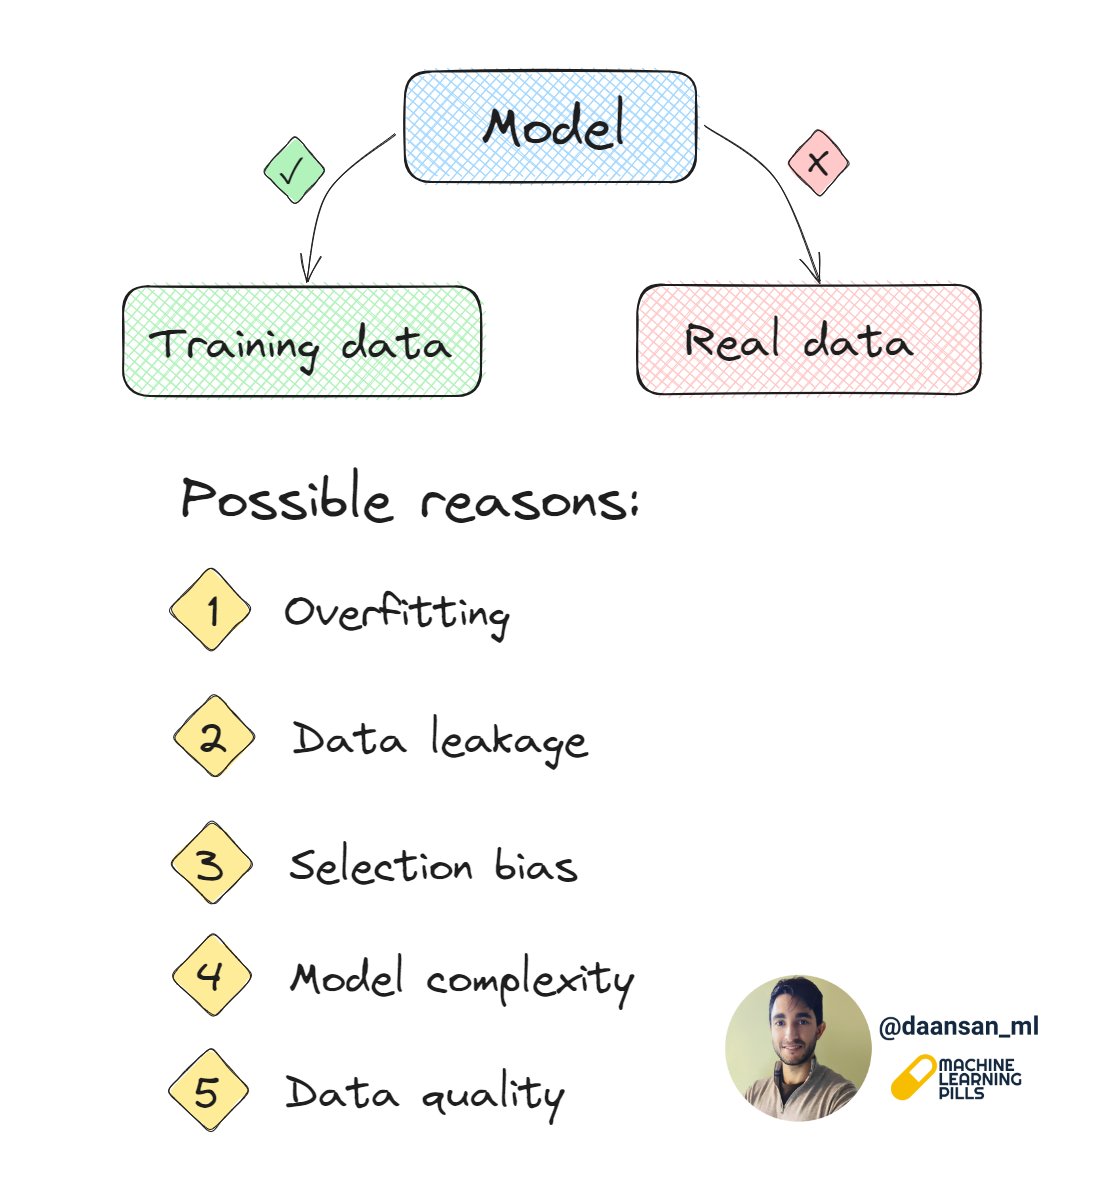 Model doesn't behave well with real data